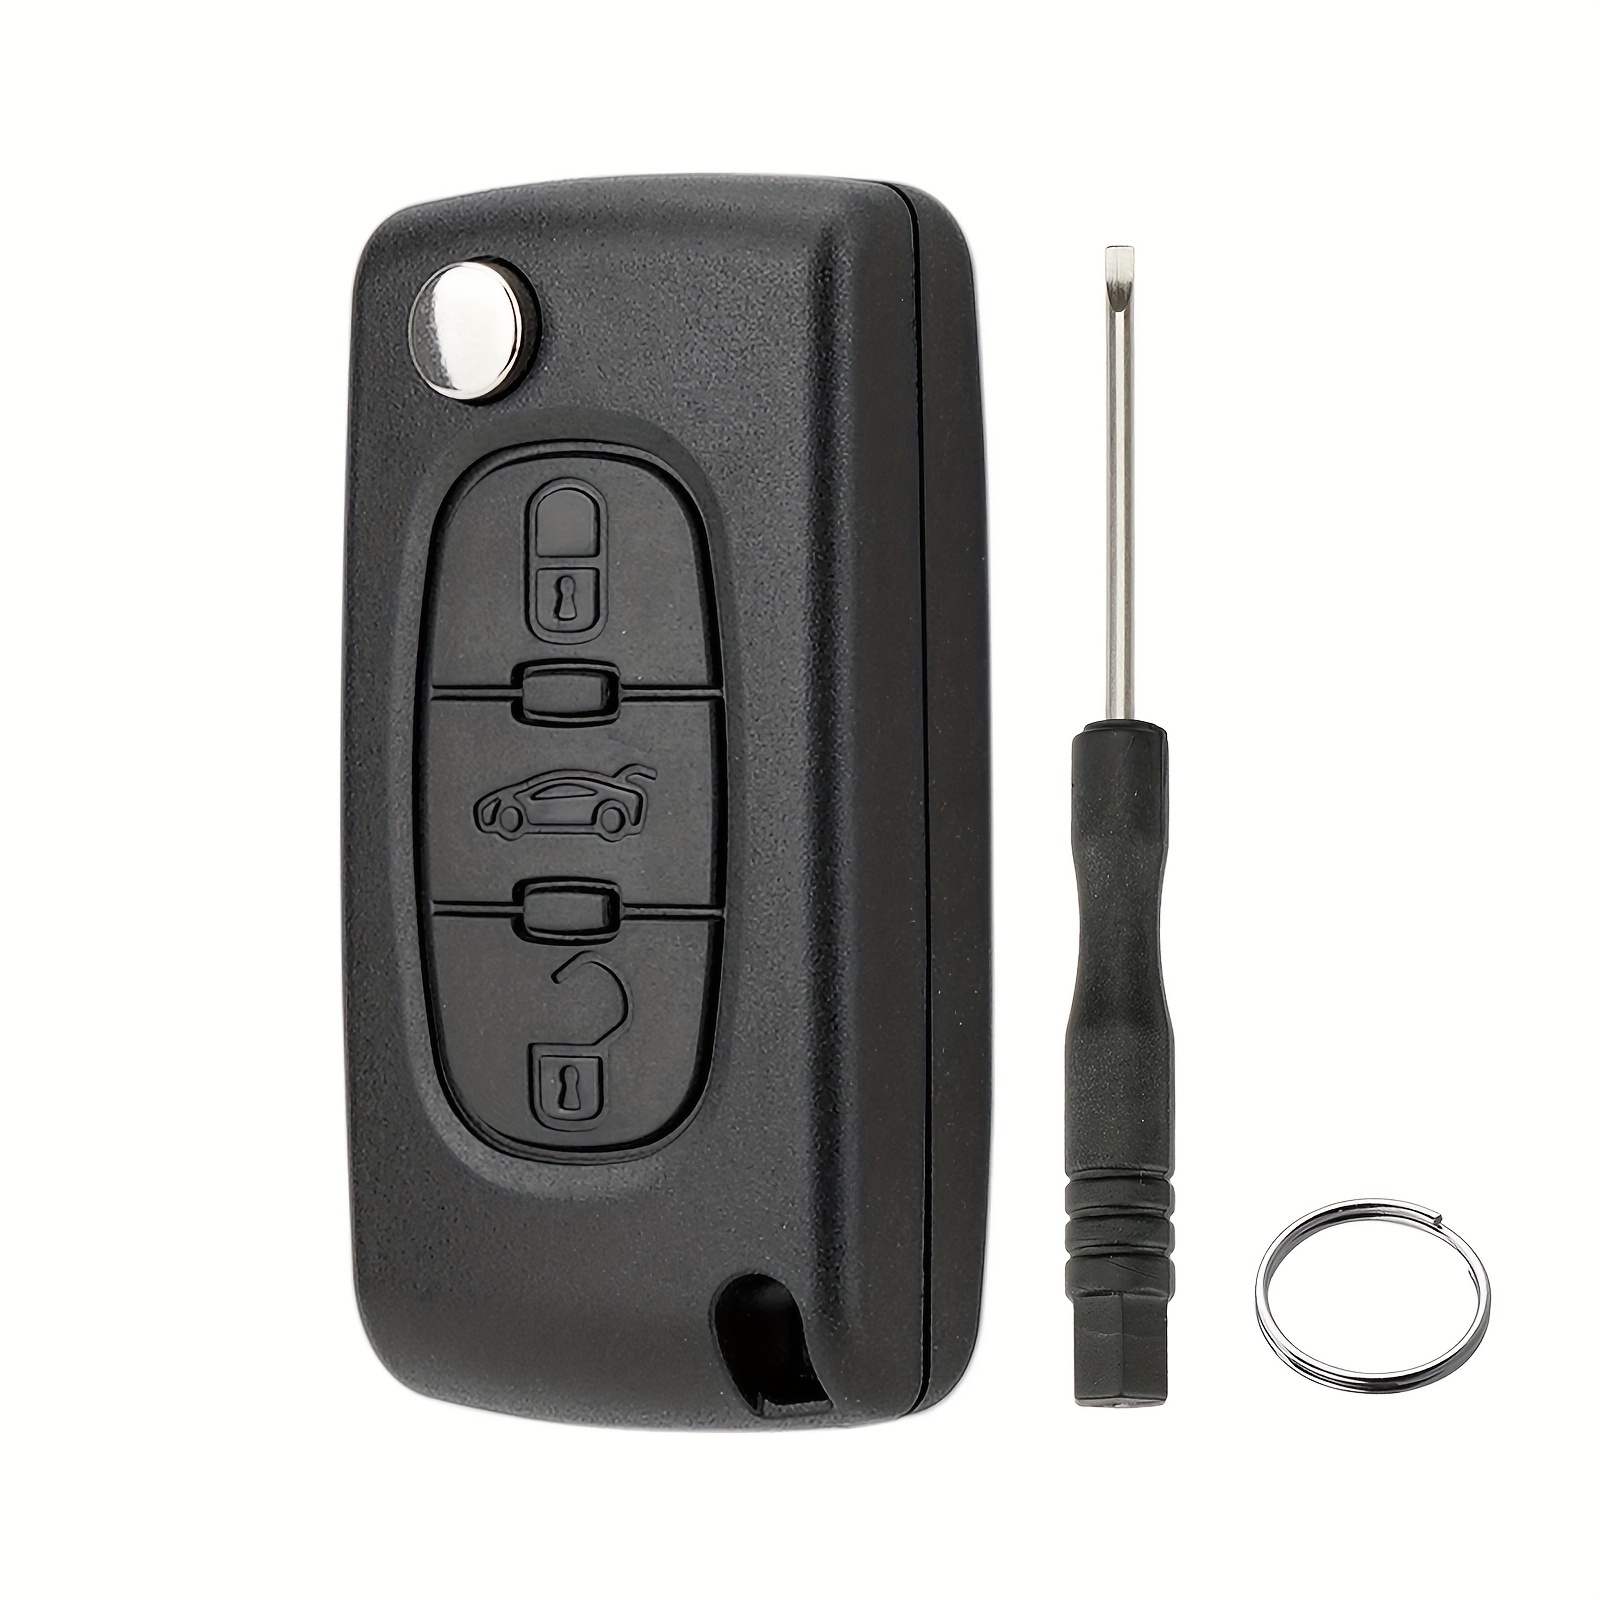  Remote Car Key Shell Case,for Peugeot 207 307 407 408